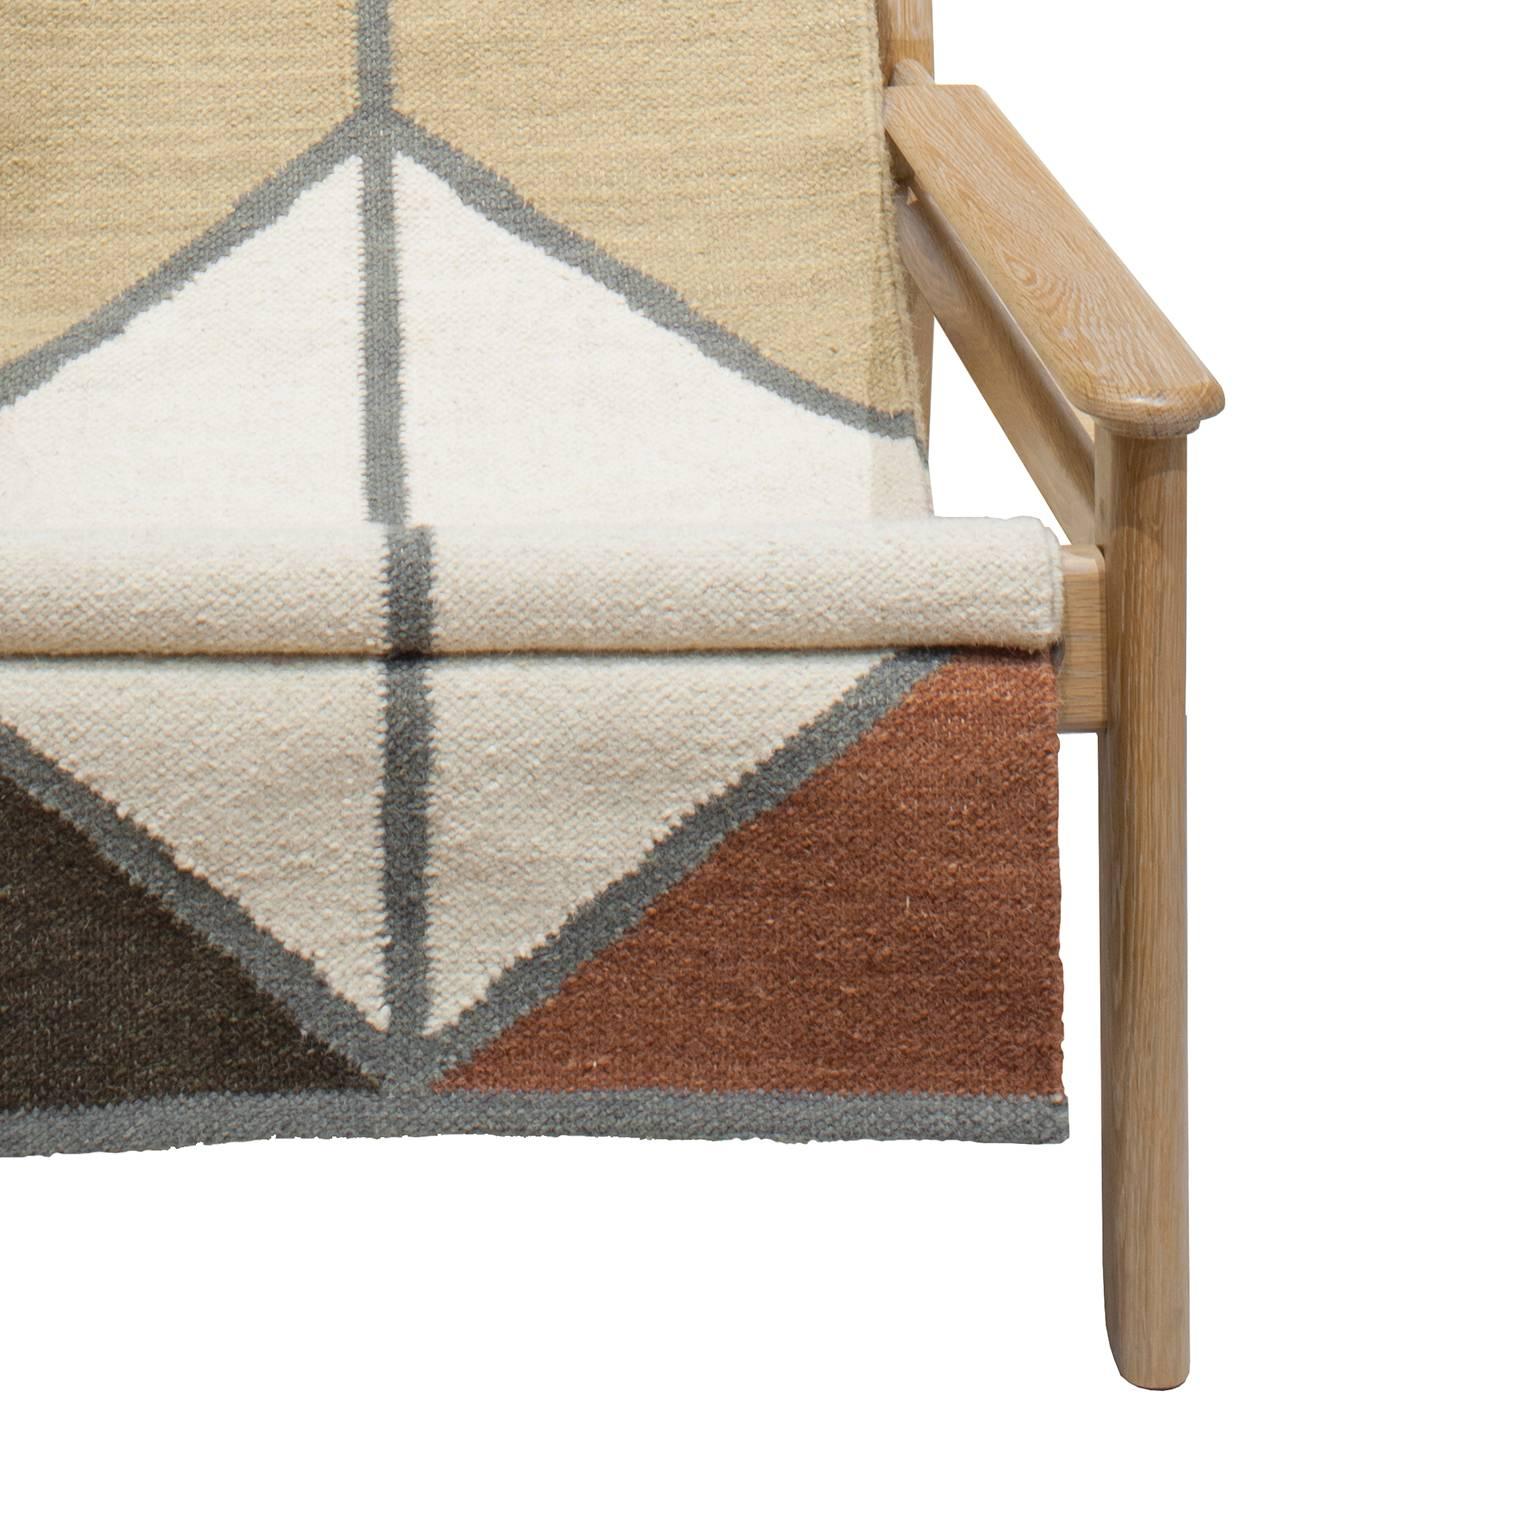 Cerused white oak lounge chair, woven wool rug sling seat. This special edition chair was designed for a museum exhibition at the Contemporary Art Museum of Houston.